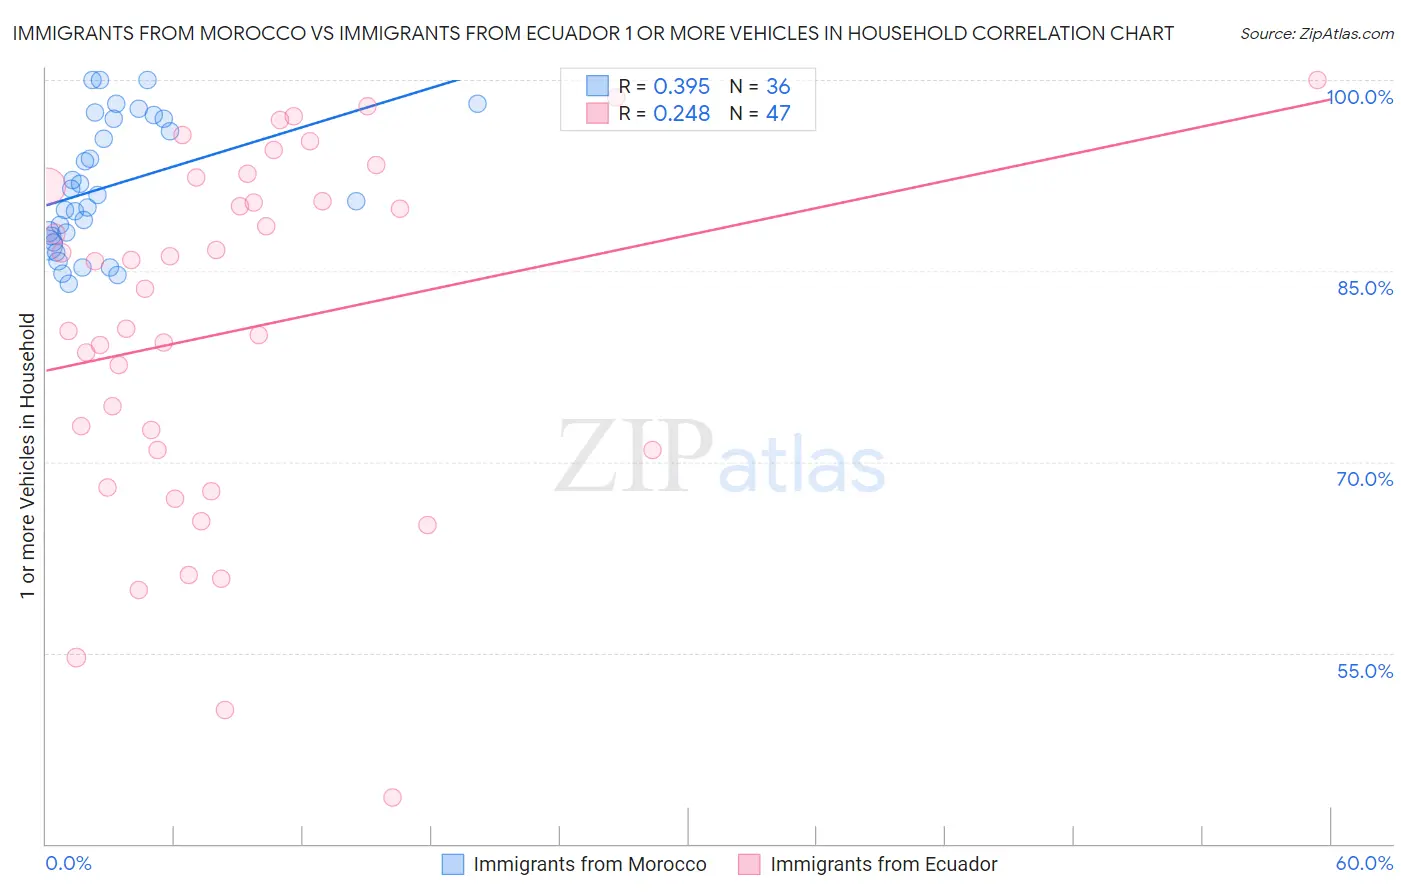 Immigrants from Morocco vs Immigrants from Ecuador 1 or more Vehicles in Household